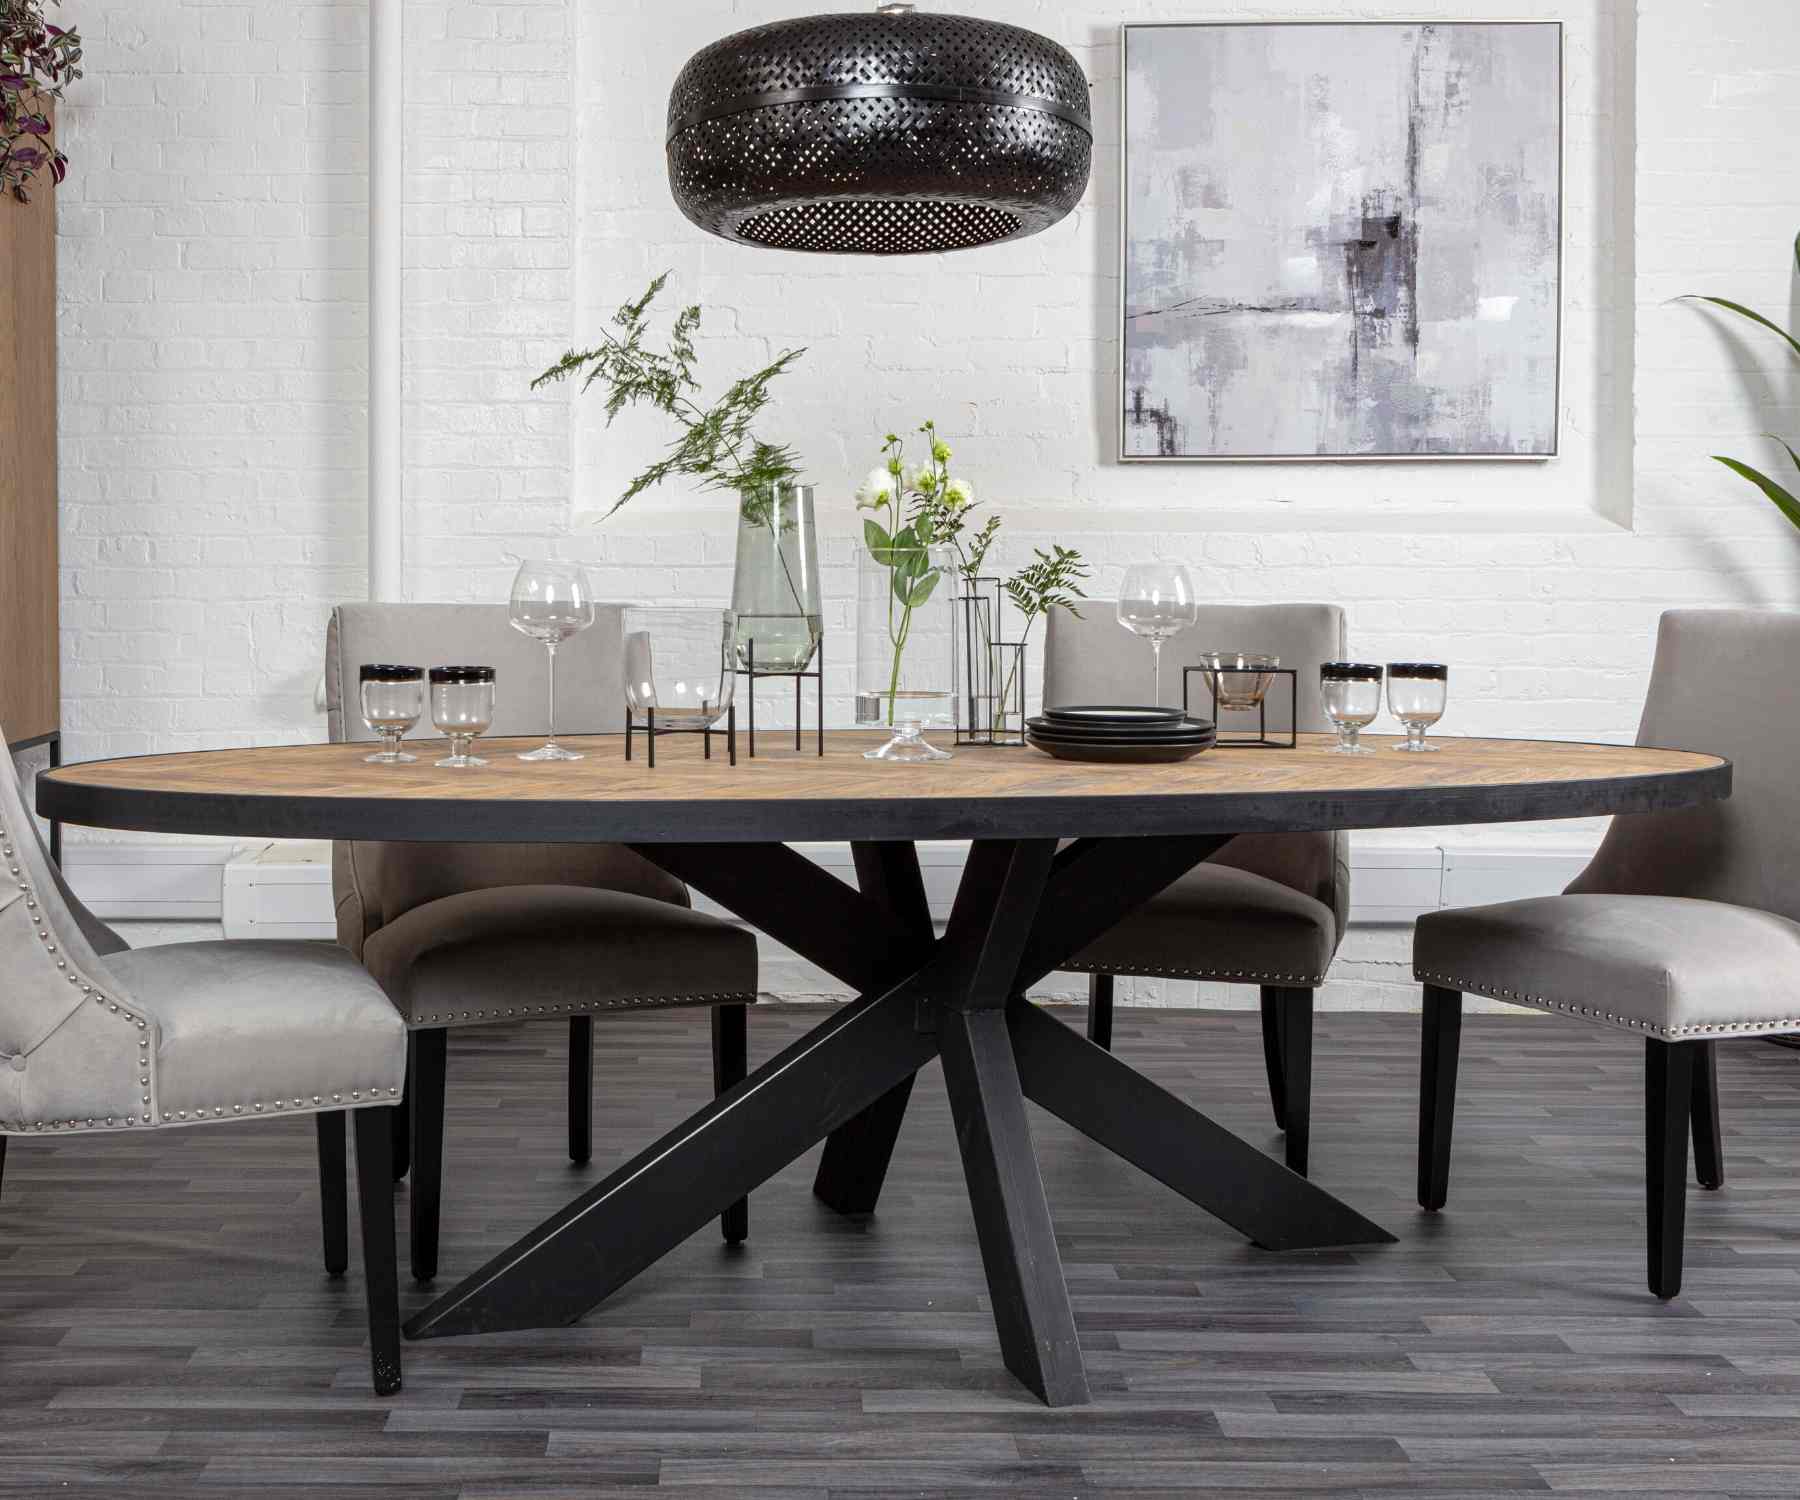 Large oval dining table with reclaimed wood top and black spider legs